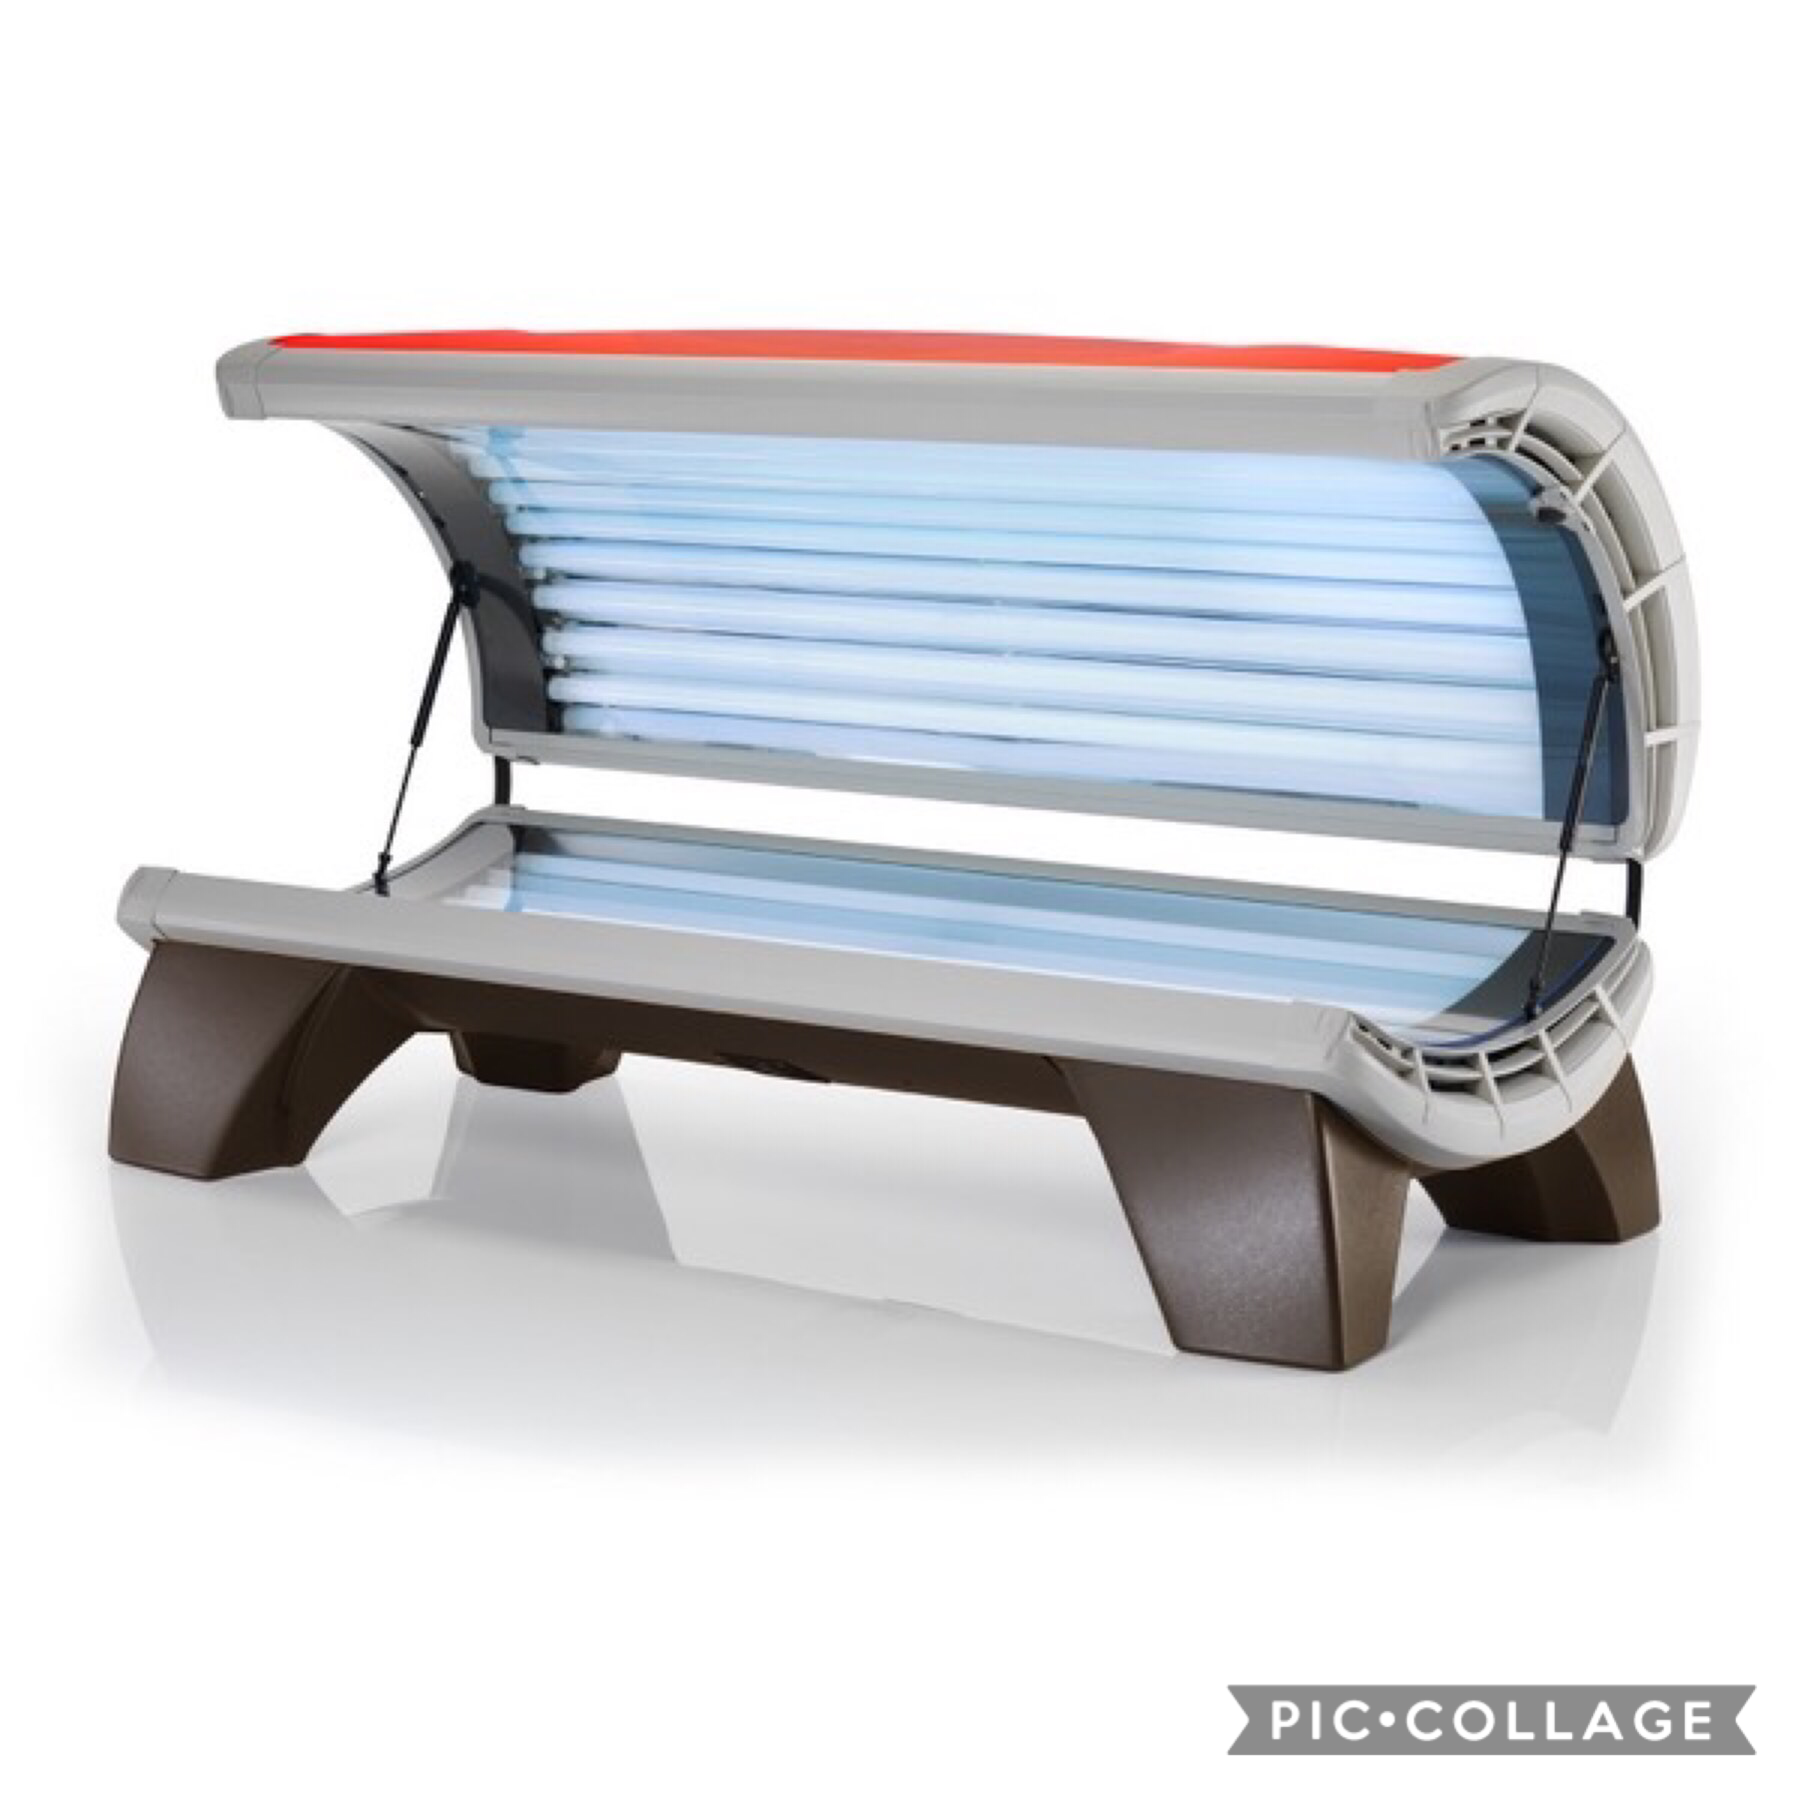 just got a new tanning bed!!! sicilians wish they could 😚🤩